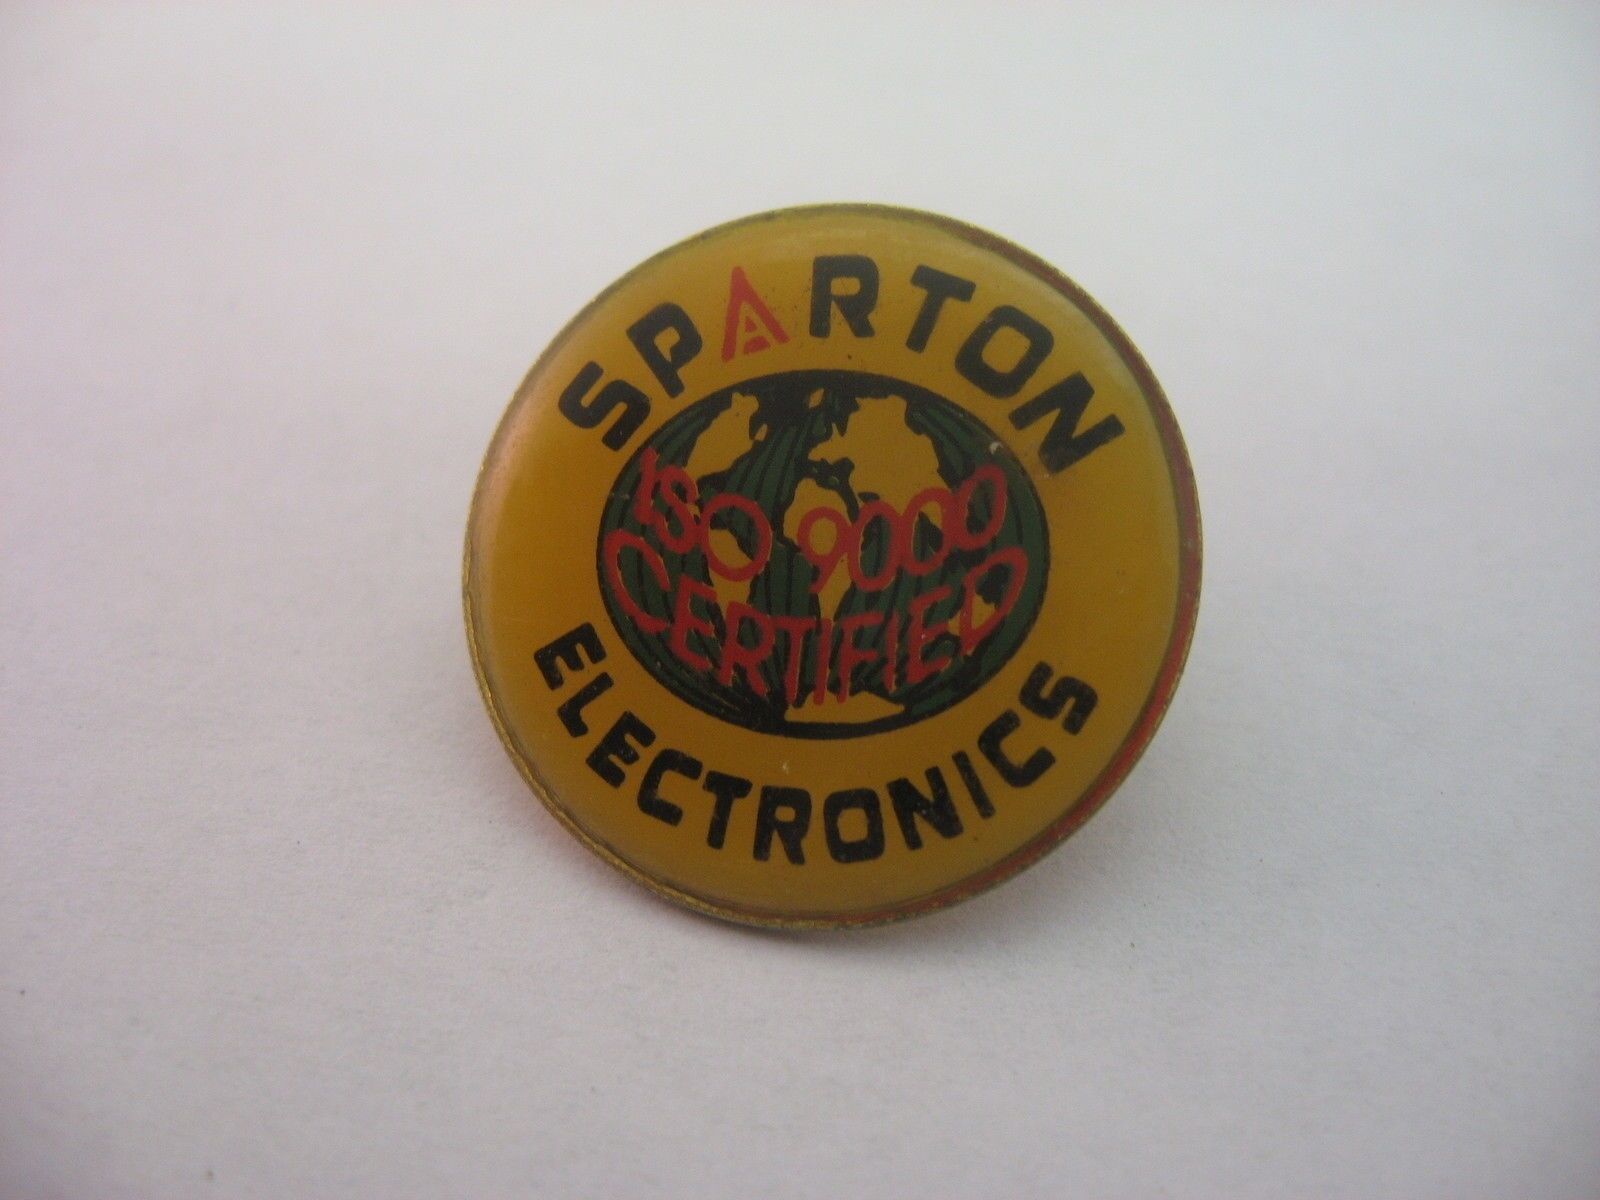 Rare Vintage SPARTON ELECTRONICS ISO 9000 Certified Pin